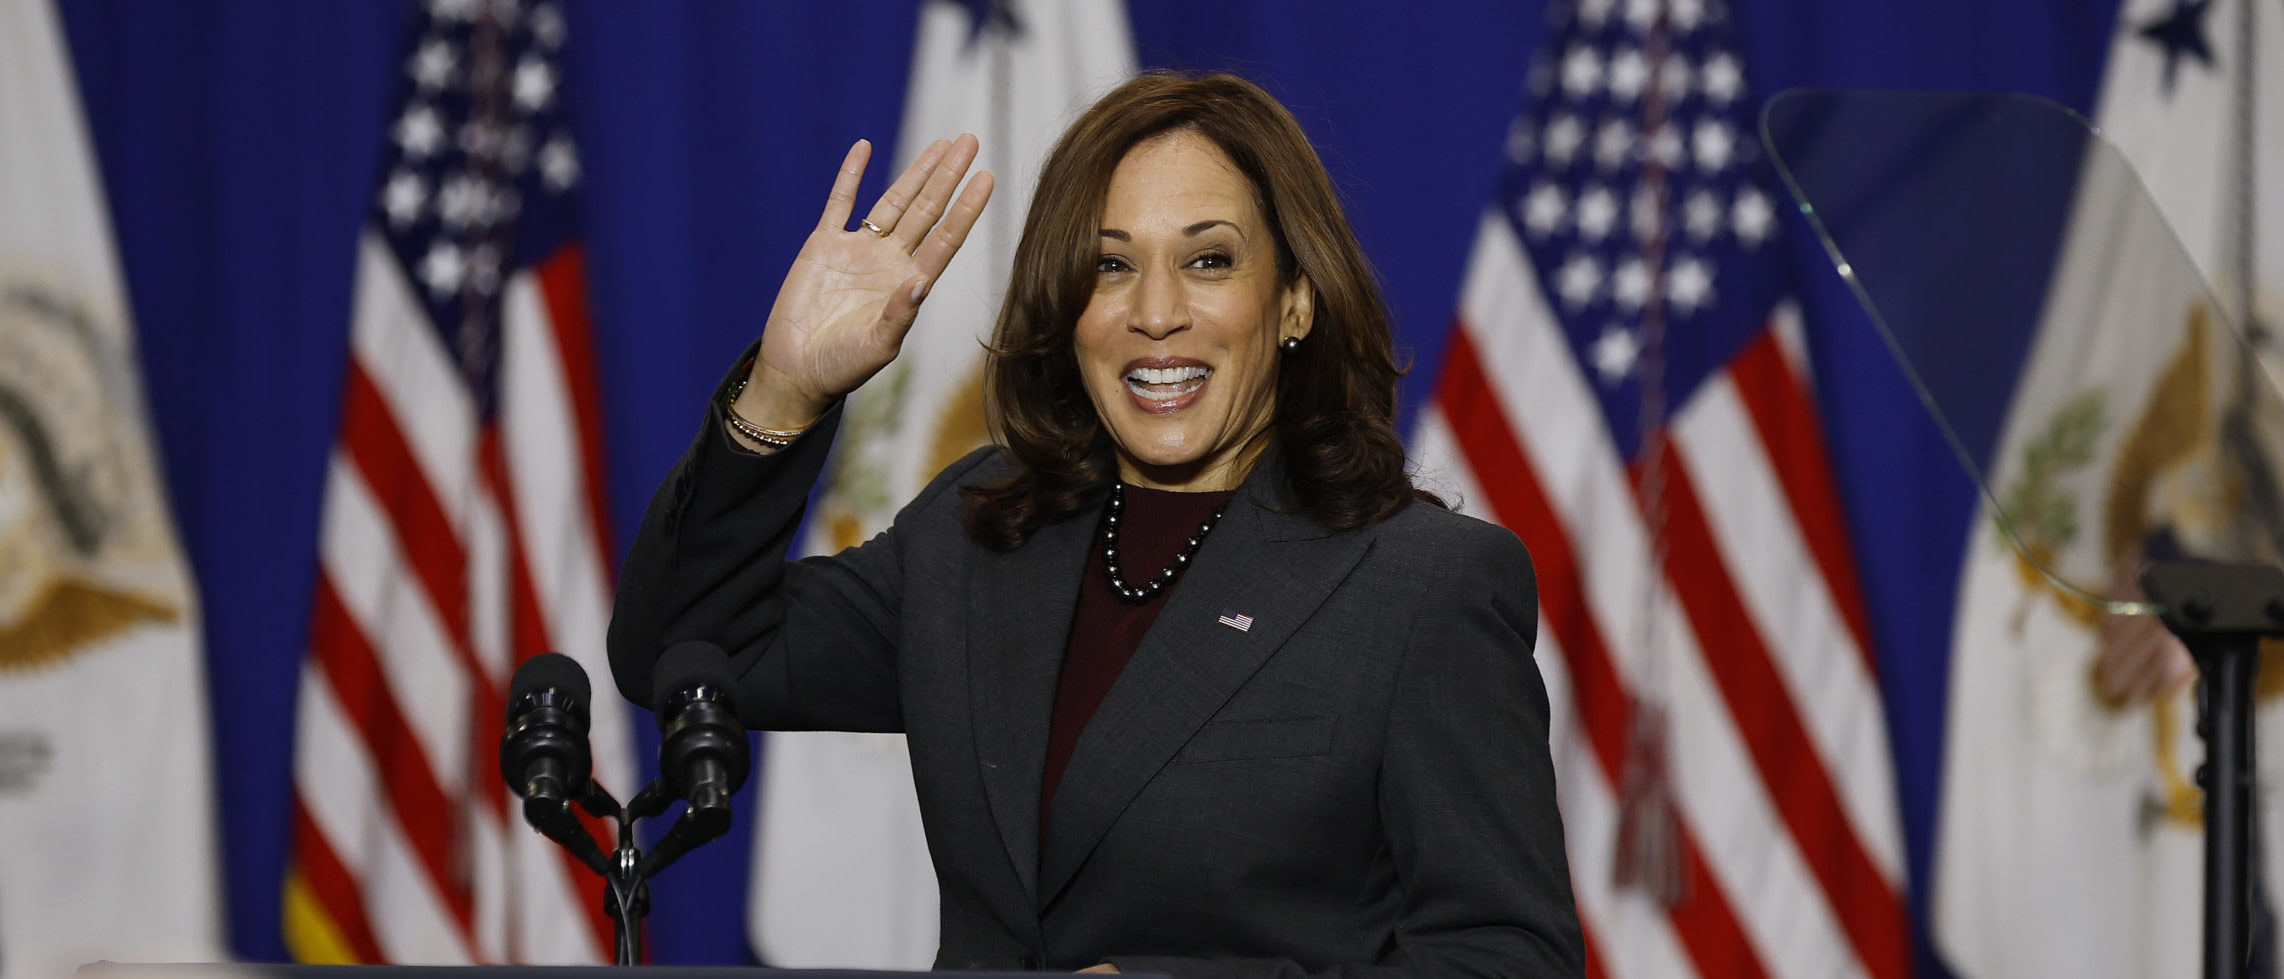 Democrats Allege People Complaining About Harris On Spanish-Language Radio Is A Coordinated Attack